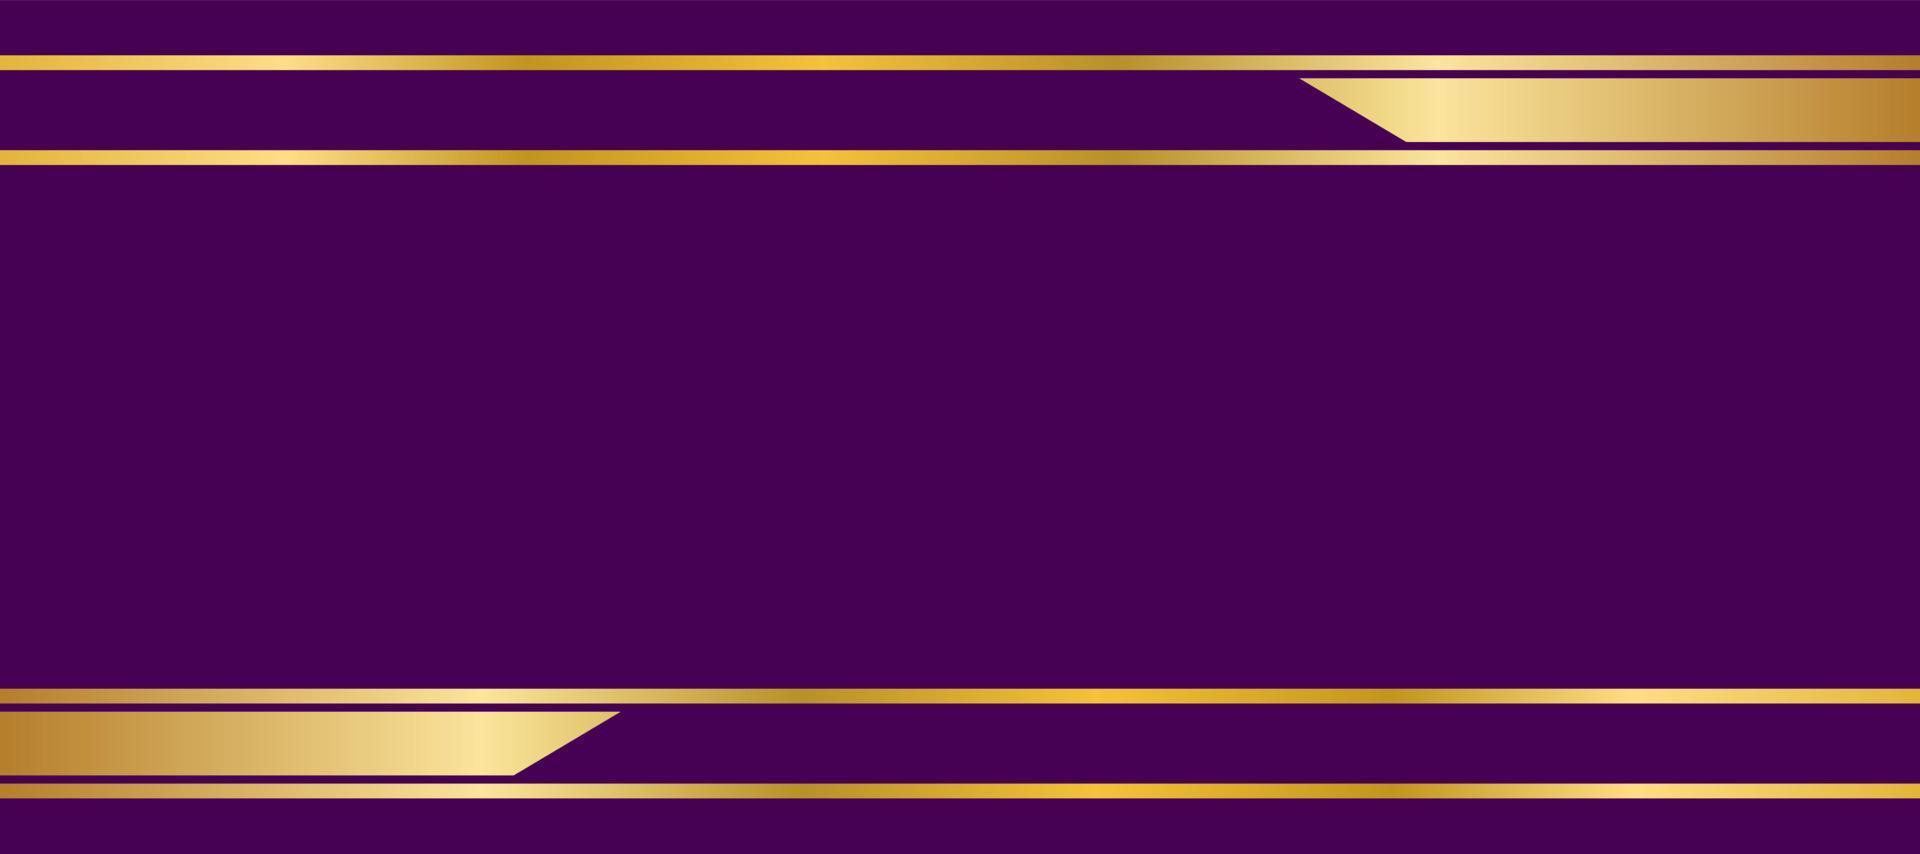 purple with gold background Design 263 Wallpaper Vector